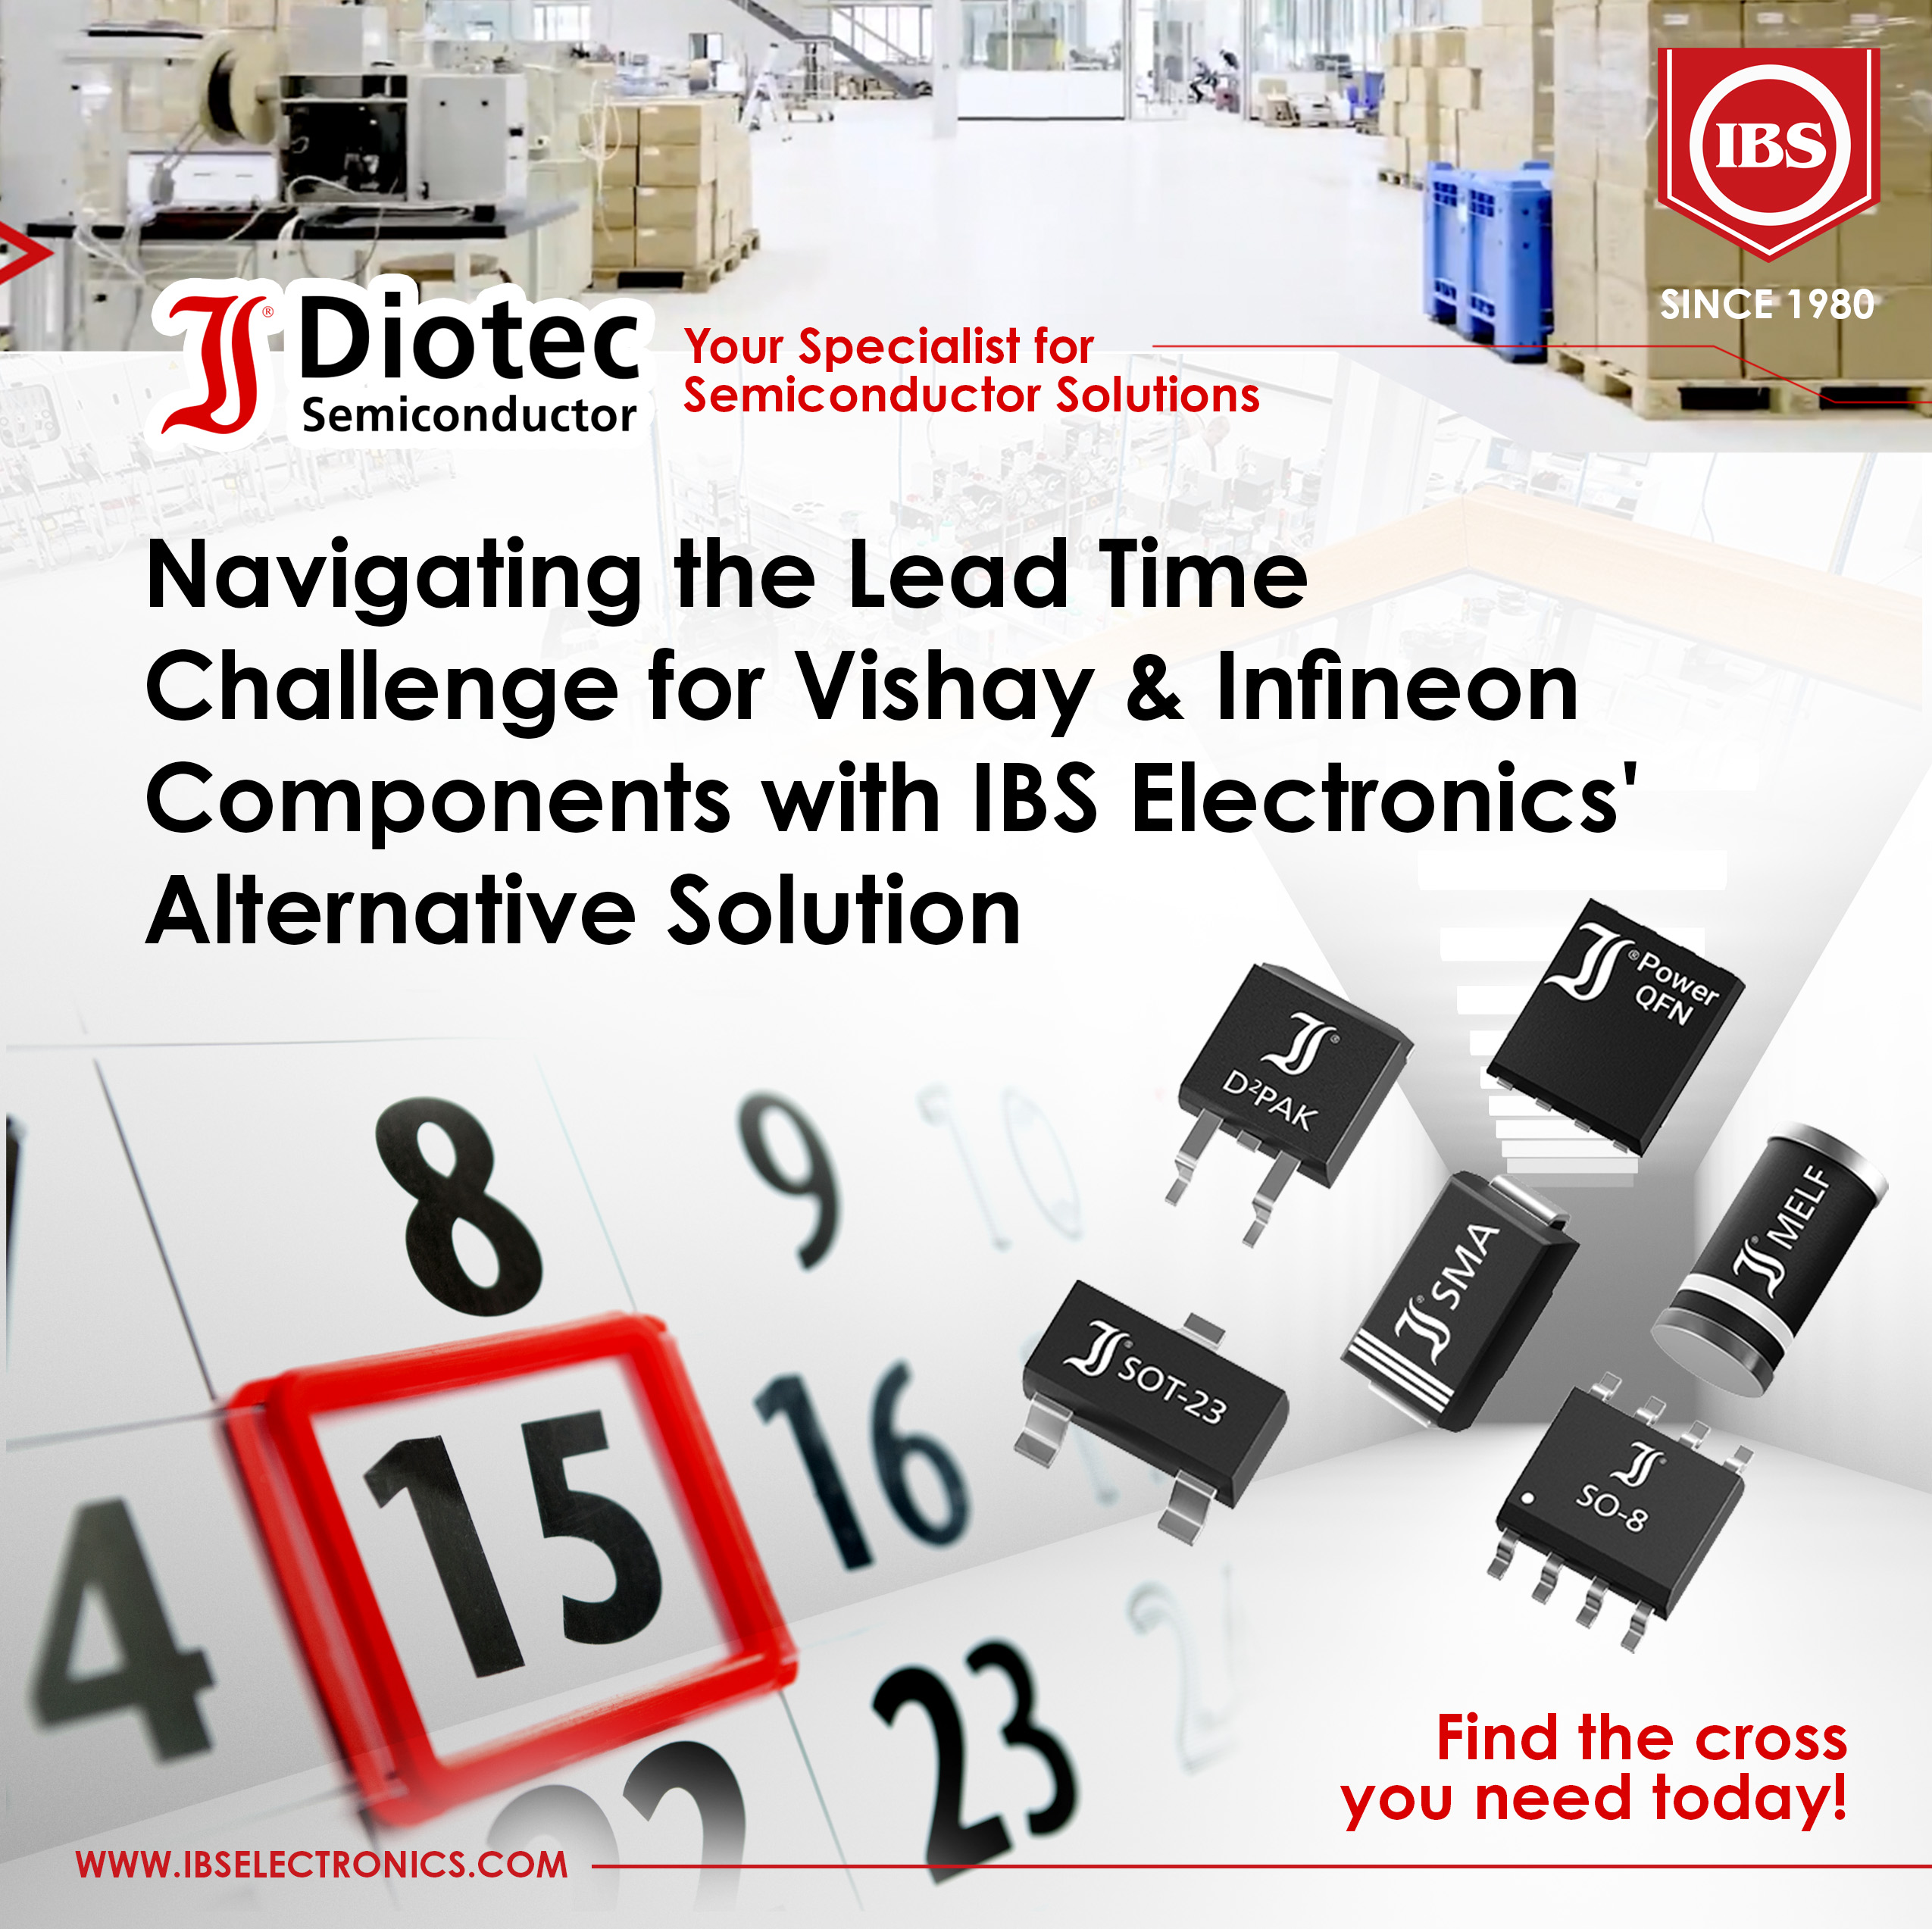 Navigating Leadtime Challenges fro Vishay and Infineon with Diotec